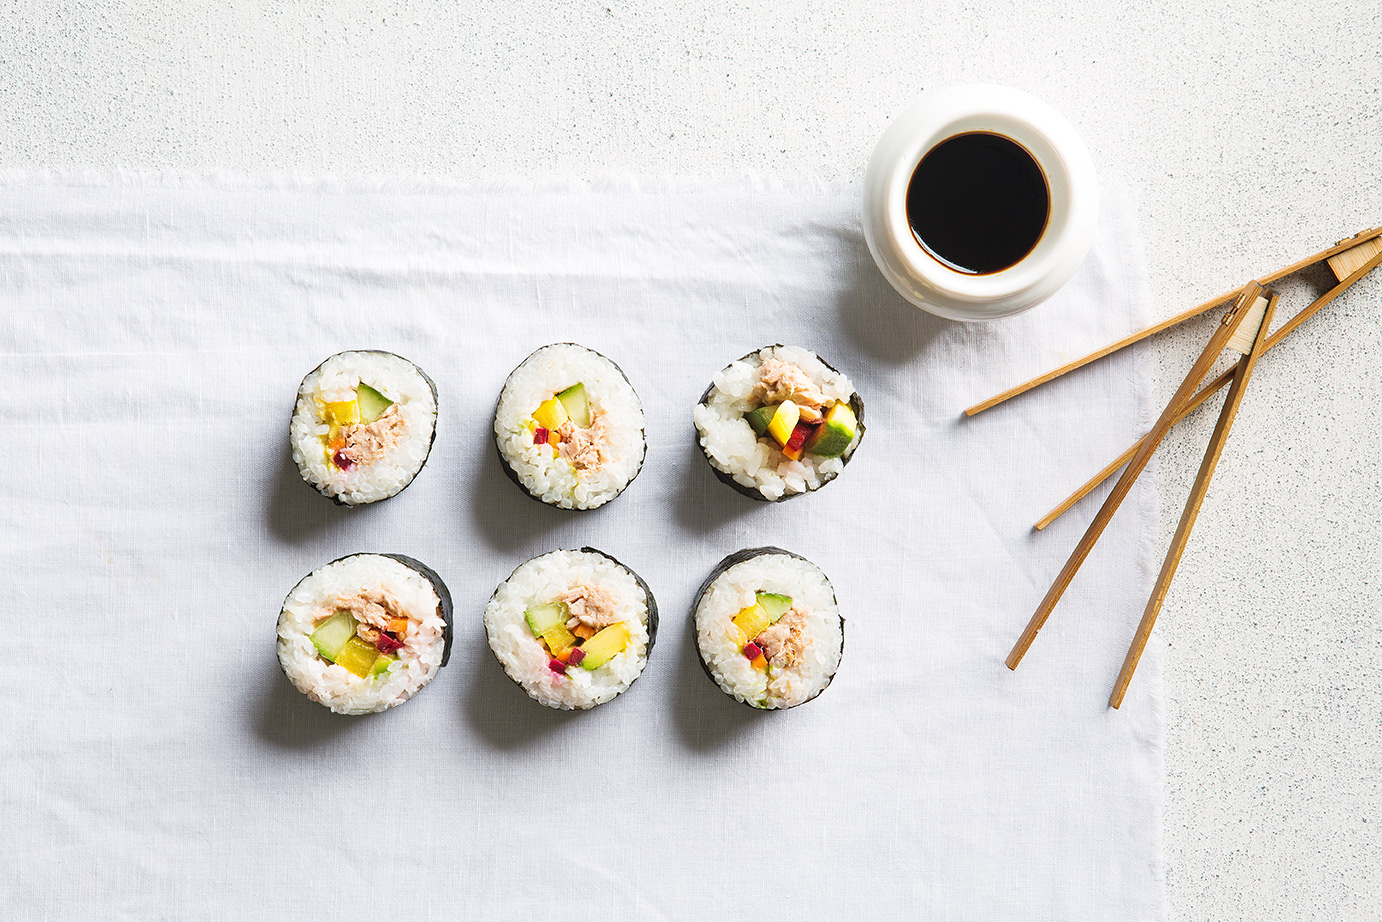 Image of six pieces of rainbow sushi served on a cloth napkin with dipping sauce and wooden chopsticks on the side